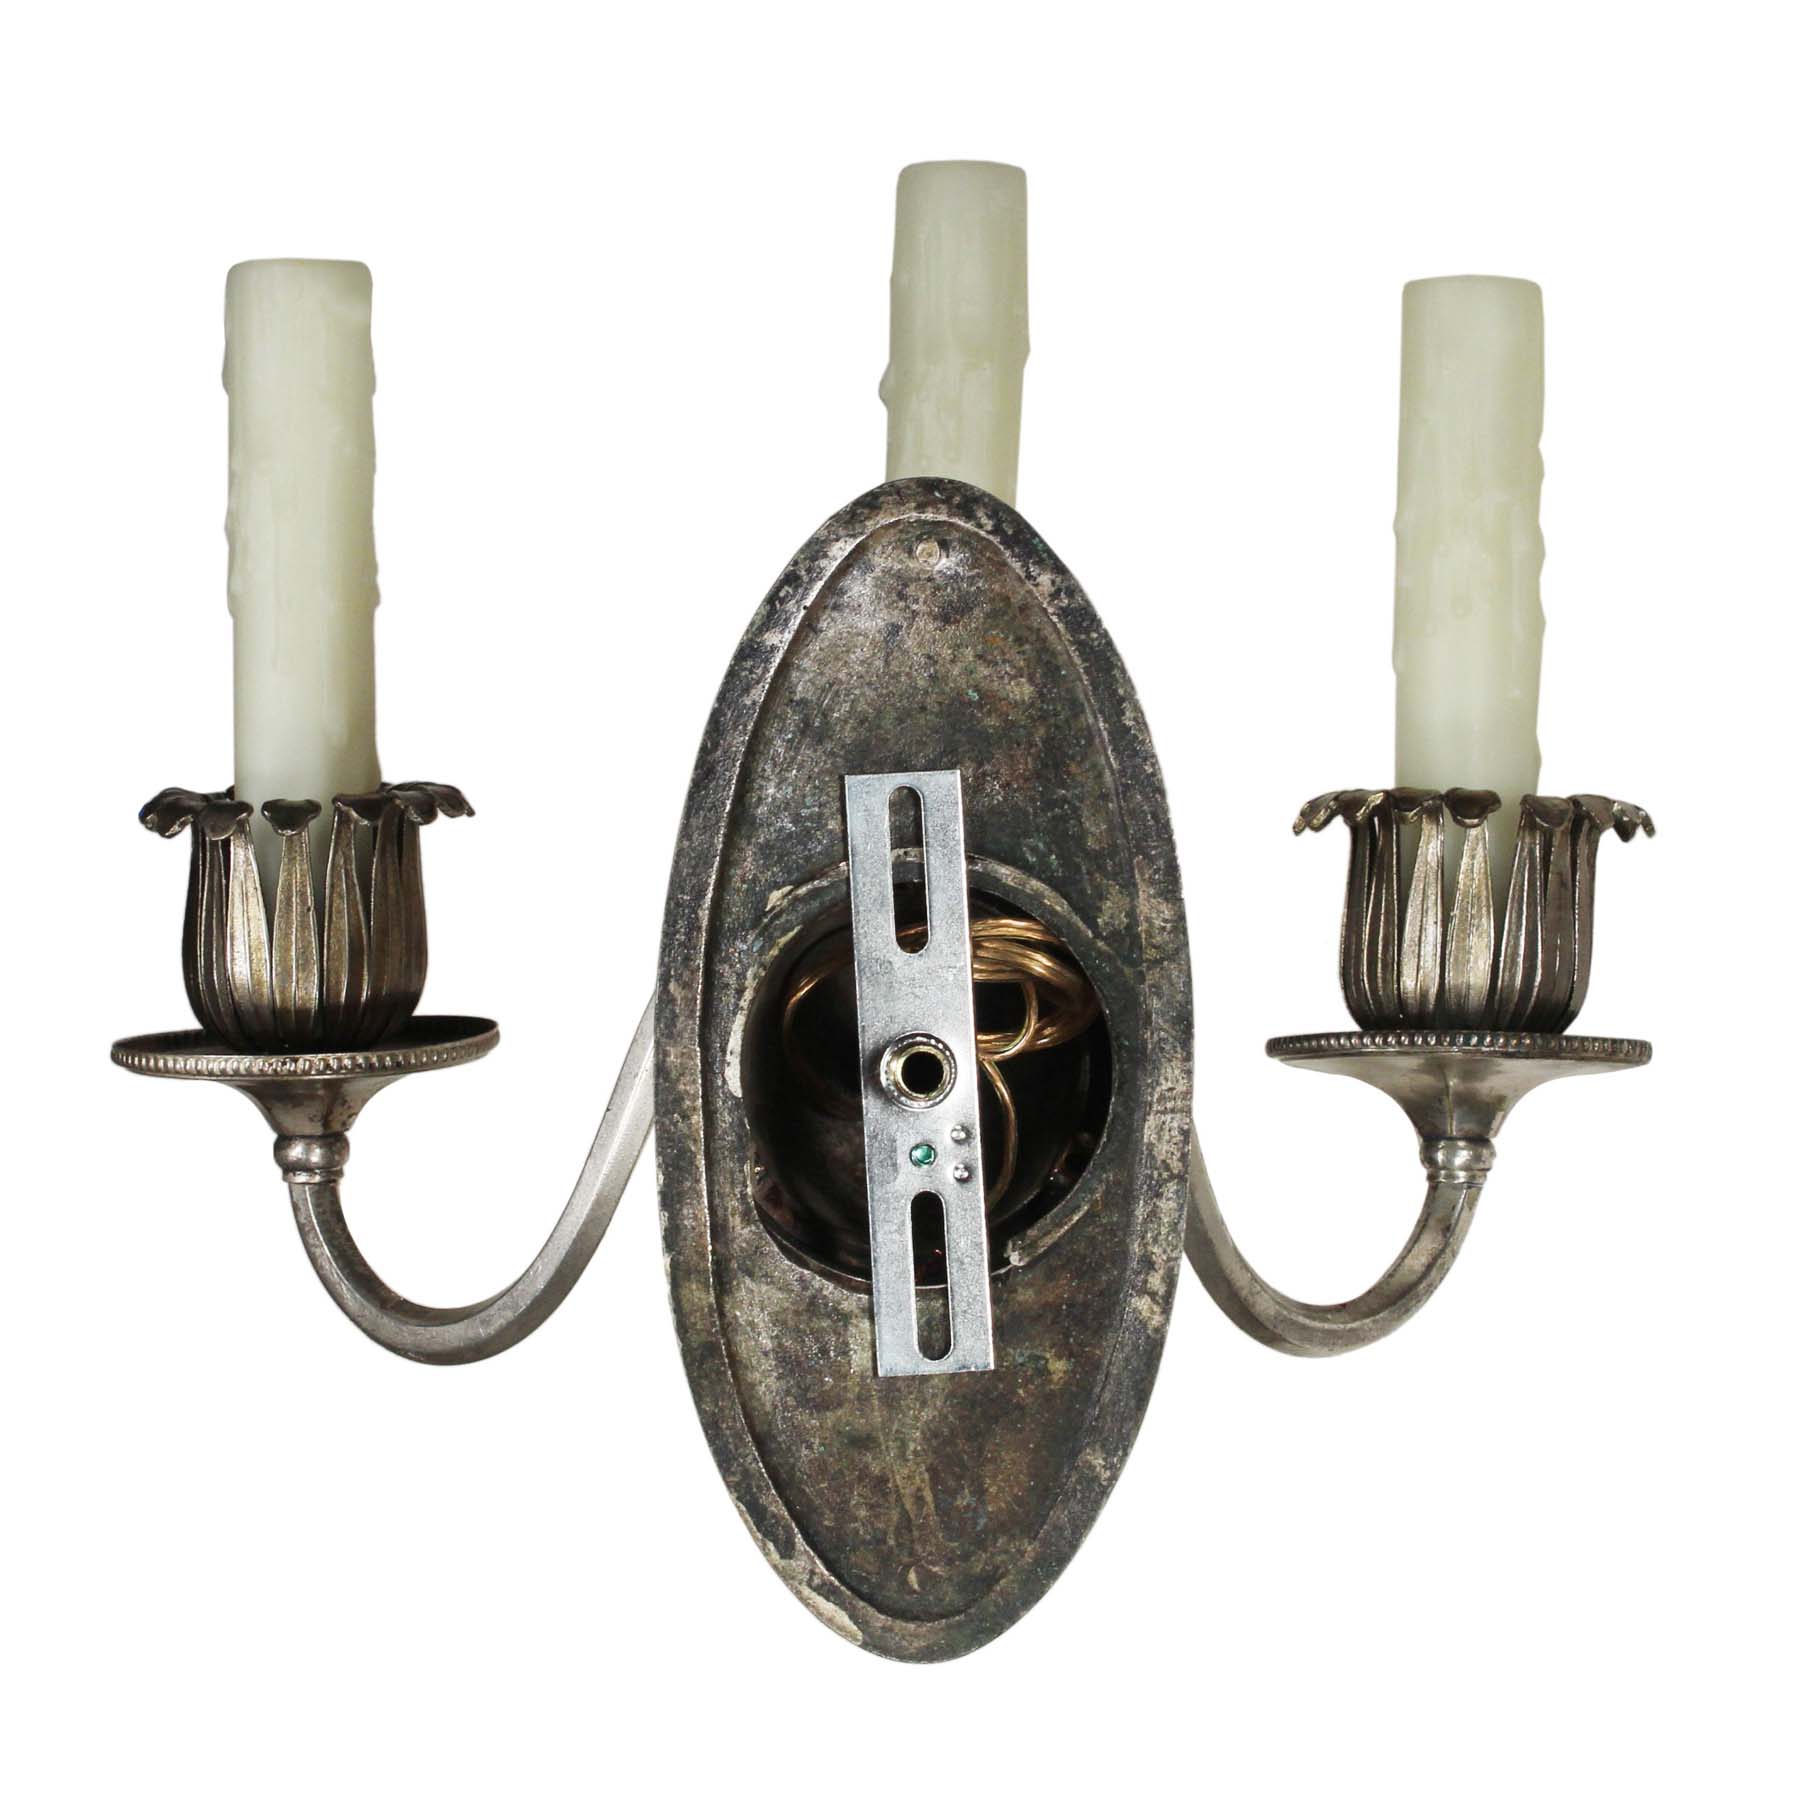 Matching Pairs of Antique Silver-Plated Three-Arm Sconces, c. 1905-69195